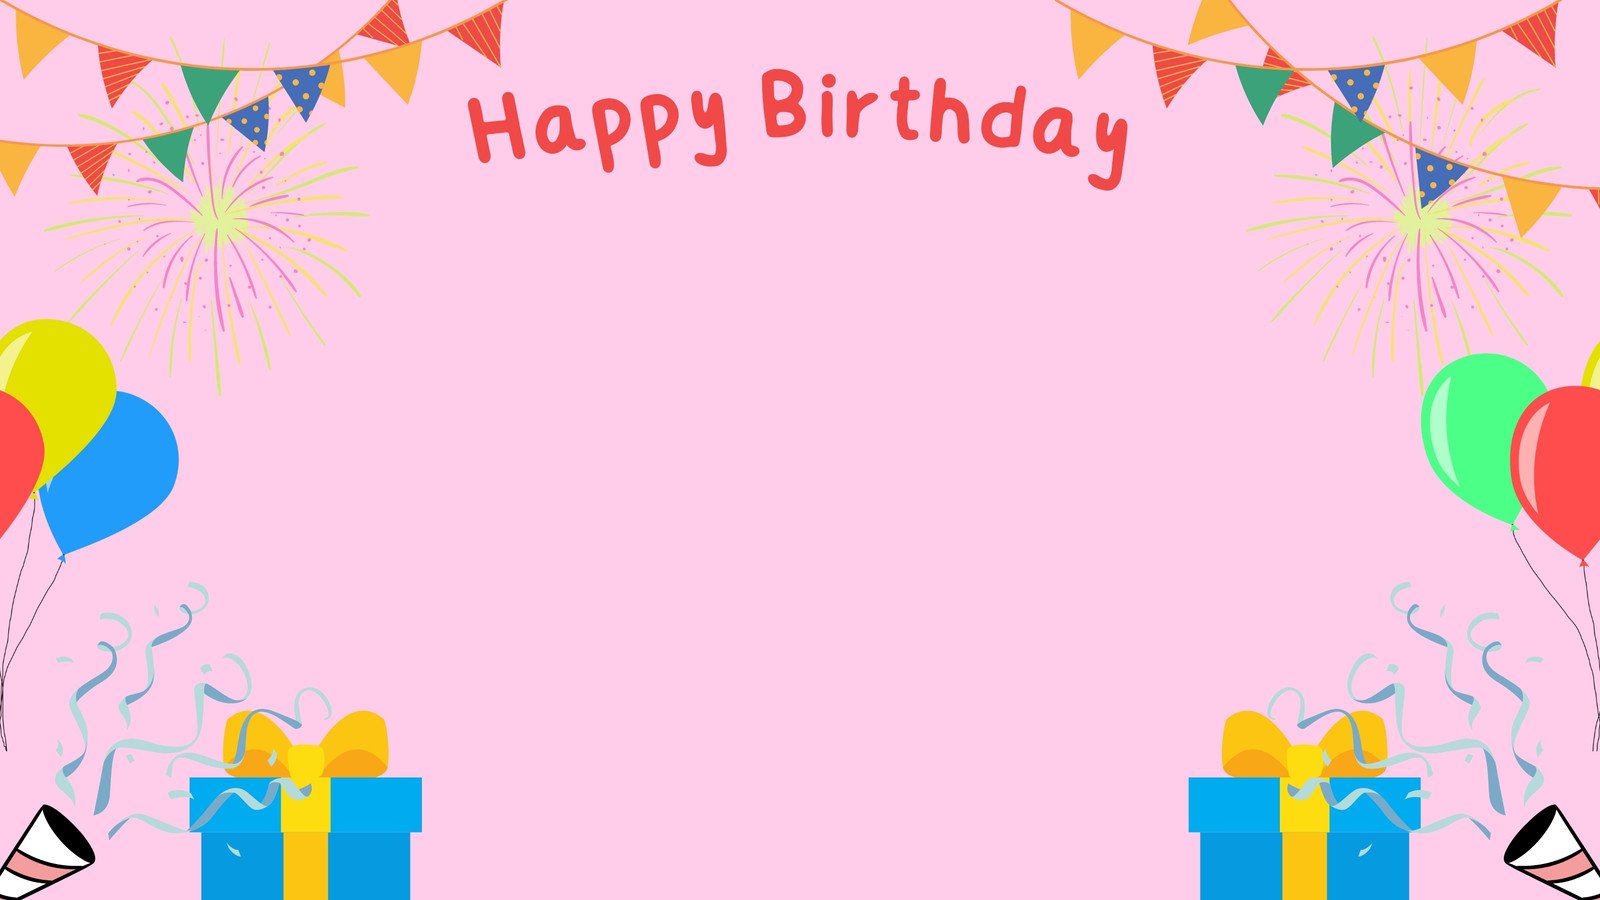 Awesome Happy Birthday Background Wallpaper 2  Happy birthday frame Happy  birthday blue Birthday background images